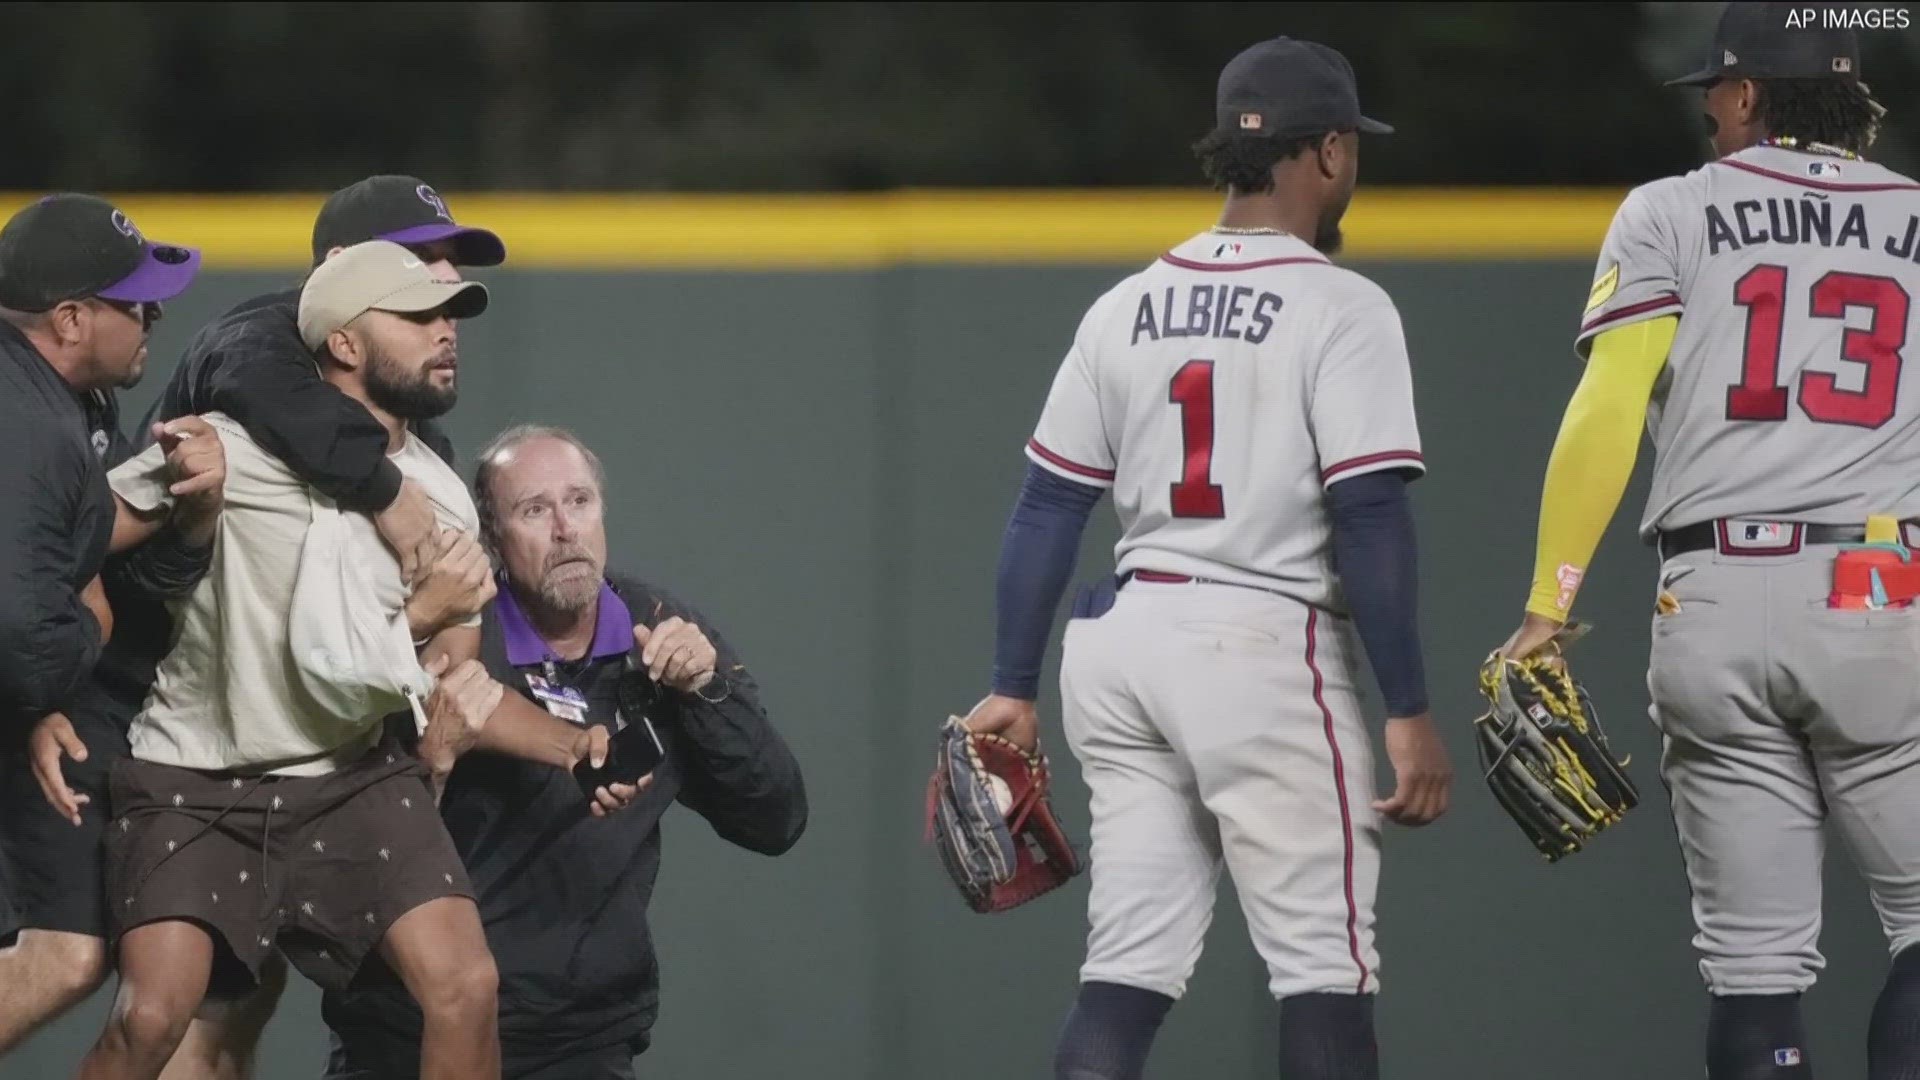 The rush happened as the Braves were playing Denver at Coors Field.